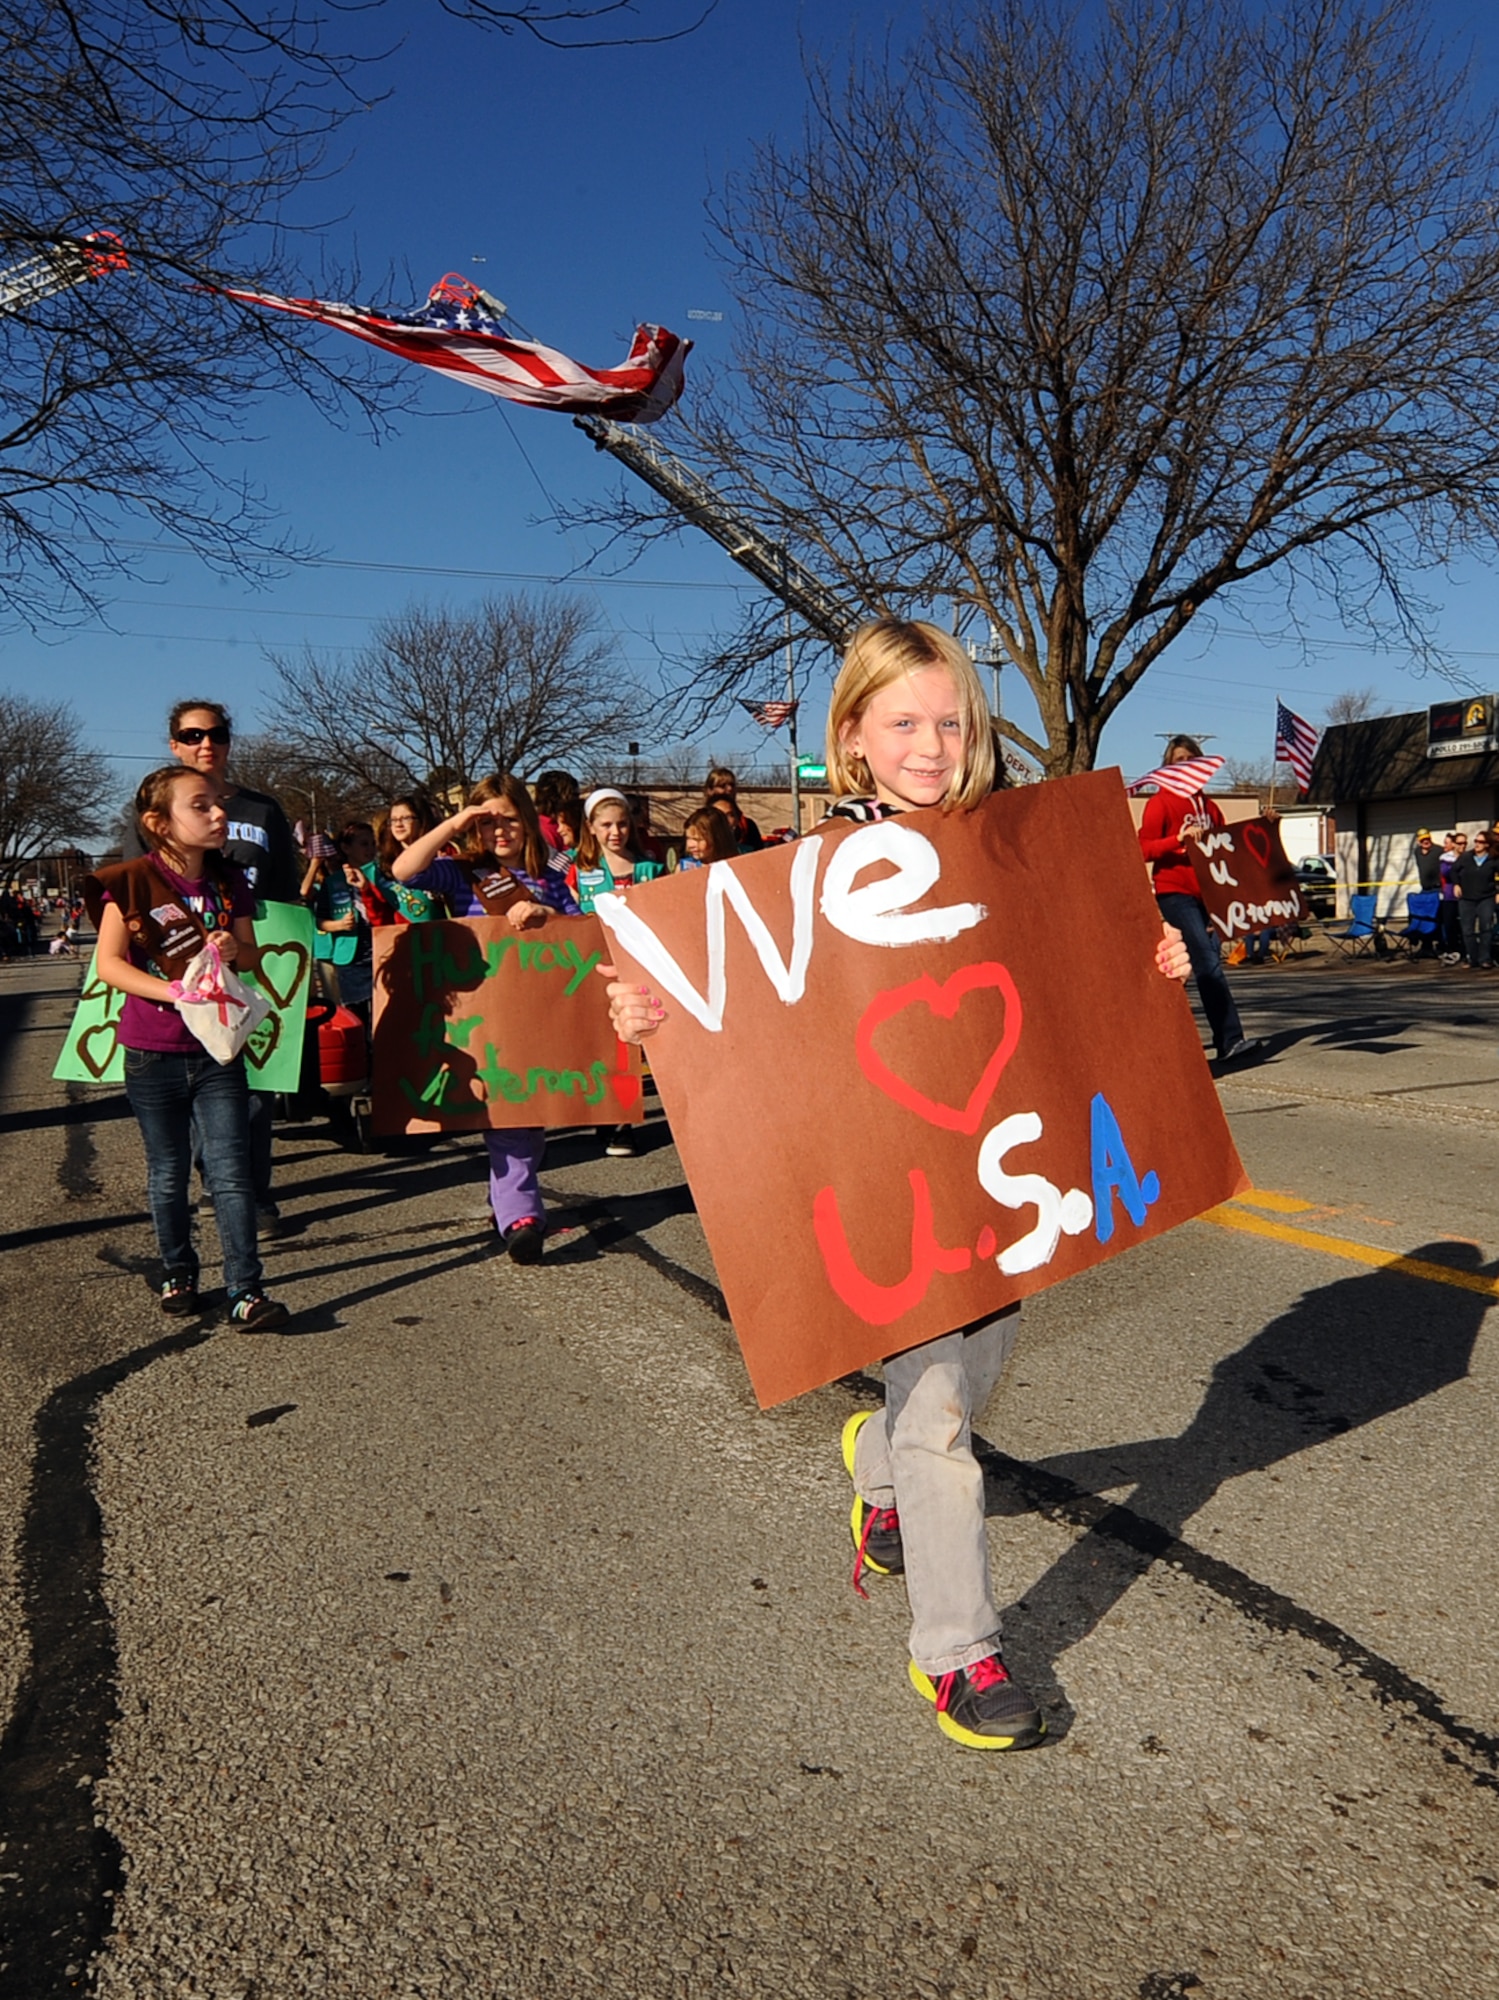 Erica Nickisch, with the Girl Scouts of America, shows her patriotism as she marches down Mission Avenue in the Veterans Day Parade in Bellevue, Neb., Nov. 10.  The parade consisted of several metro area businesses, schools, clubs and other organizations.  (U.S. Air Force photo by Josh Plueger/Released)